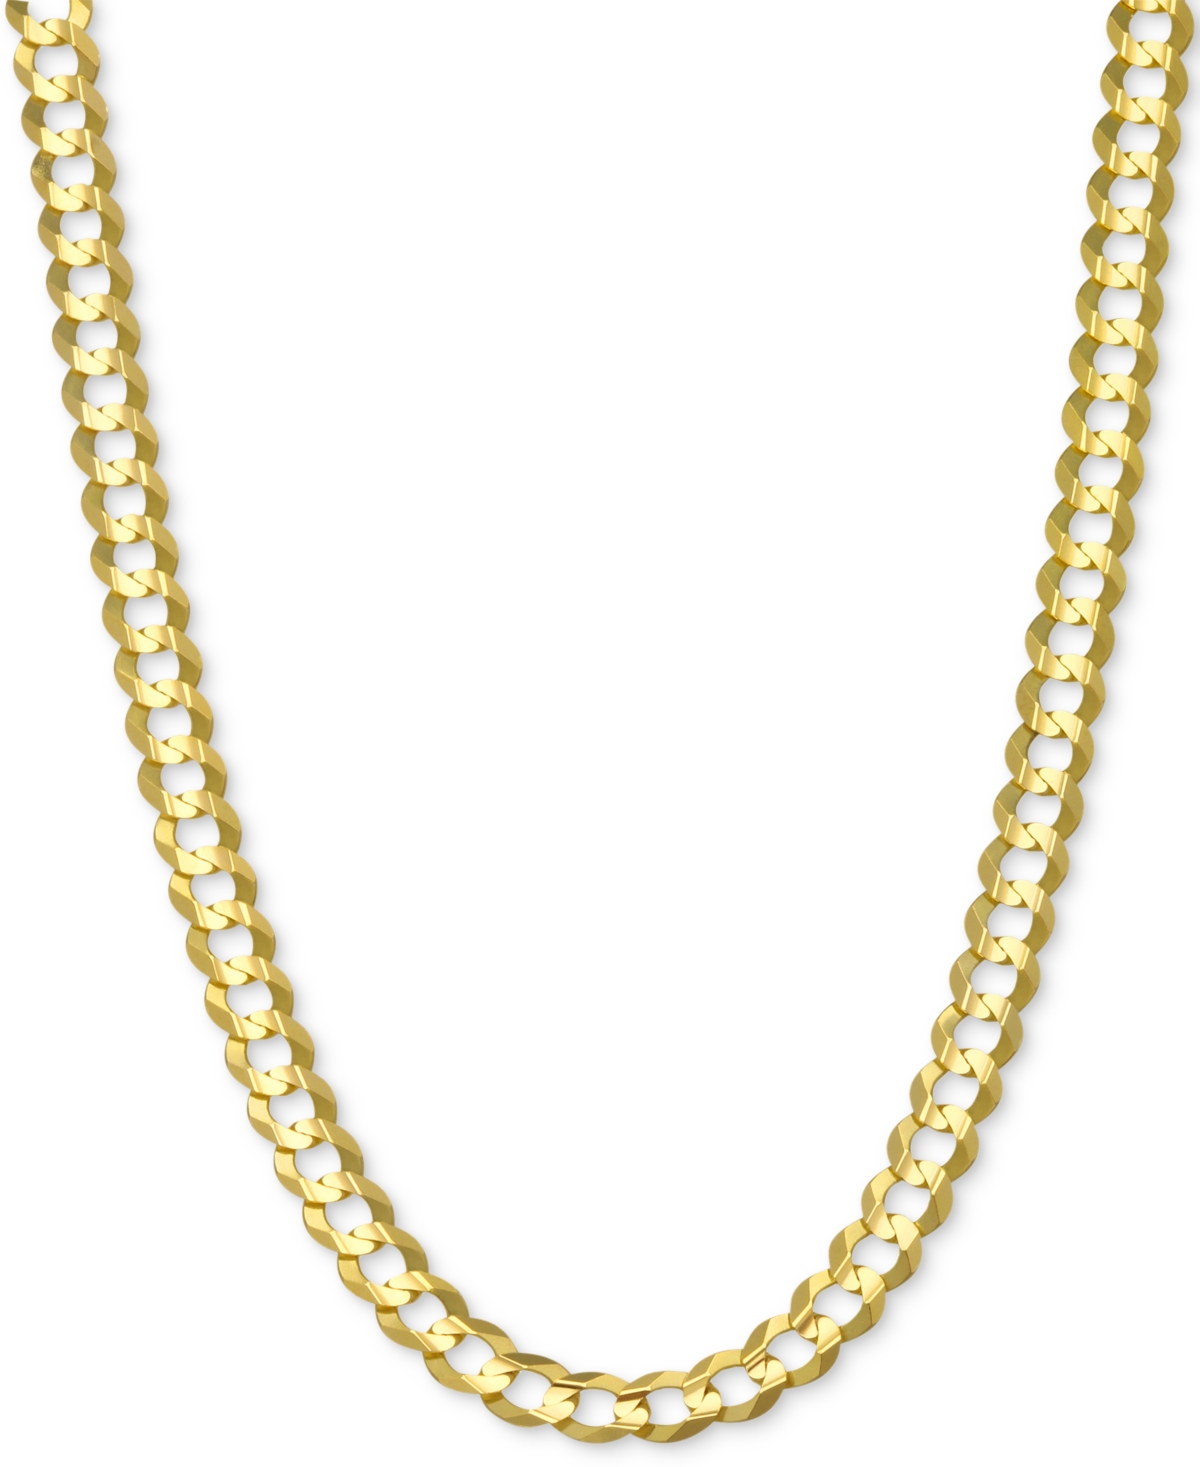 Italian Gold 28" Open Curb Link Chain Necklace (4-5/8mm) In Solid 14k Gold